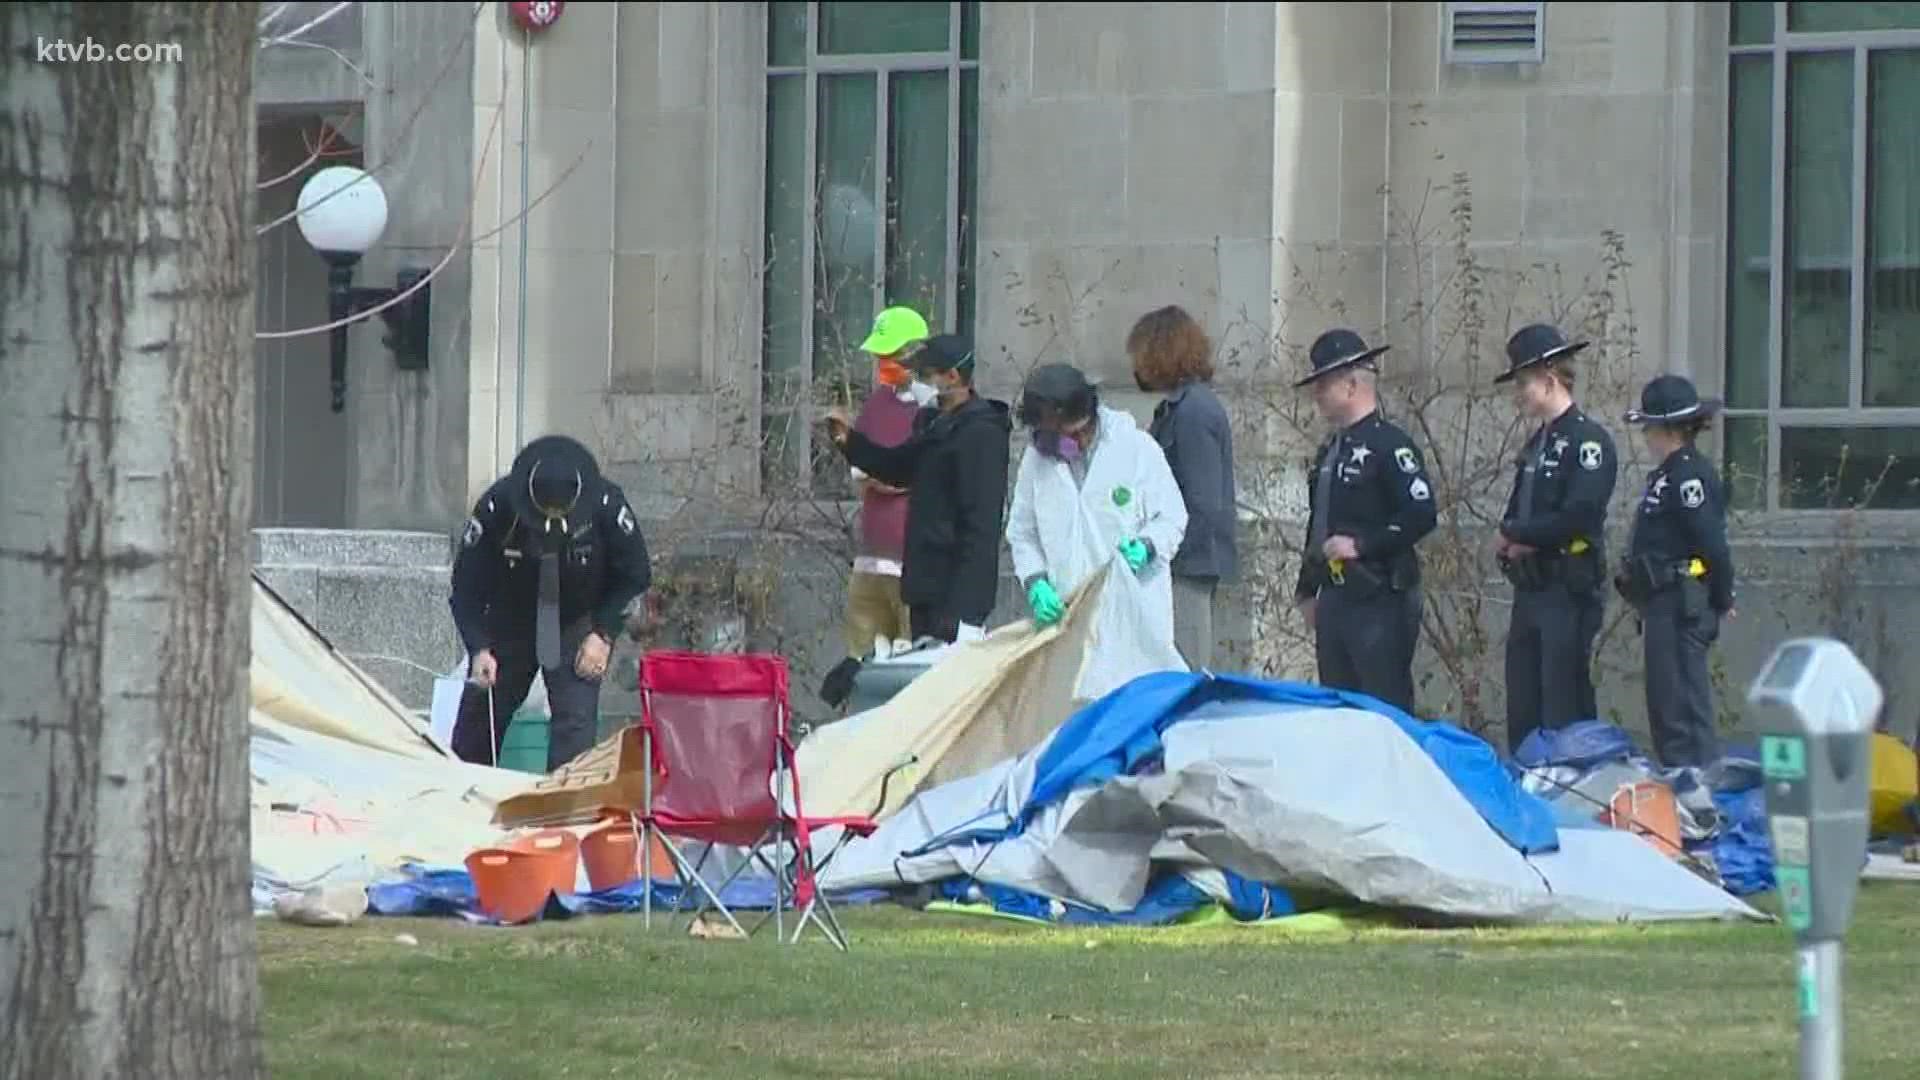 The Department of Administration is currently cleaning the area, leaving some tents on the former Ada County Courthouse lawn at Jefferson and 6th streets.